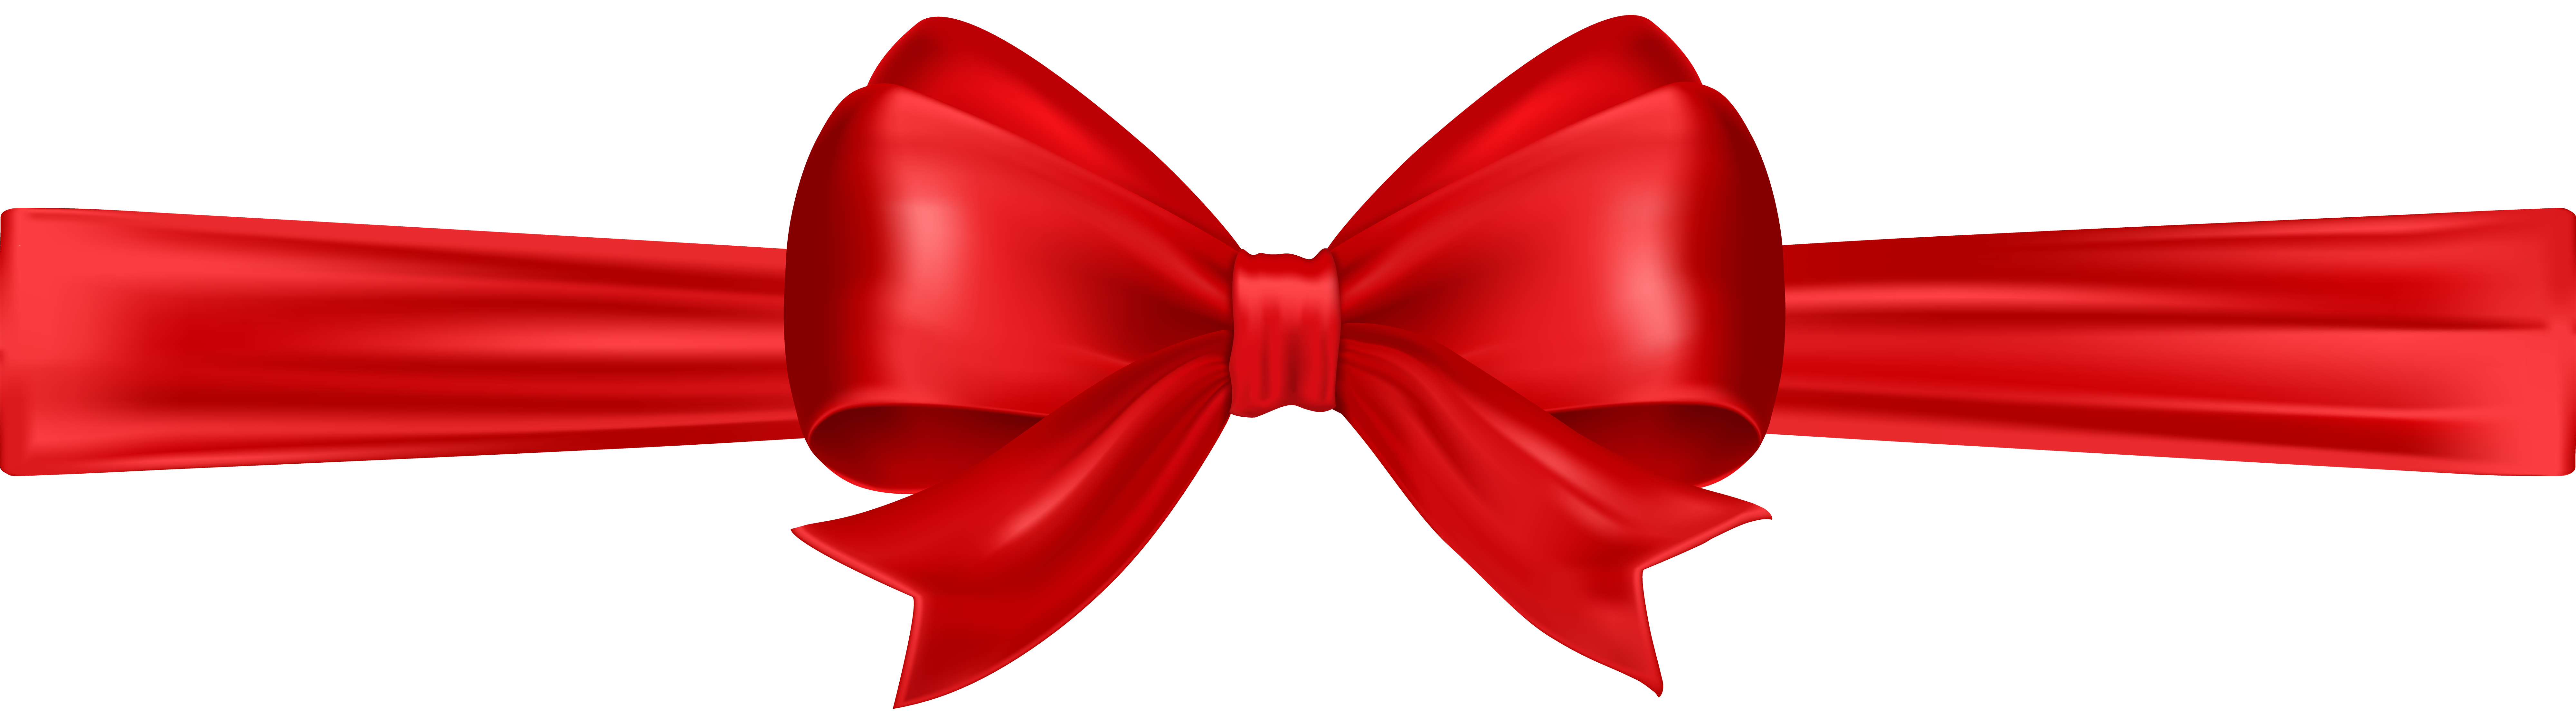 red bow clip art png image gallery yopriceville high #28574